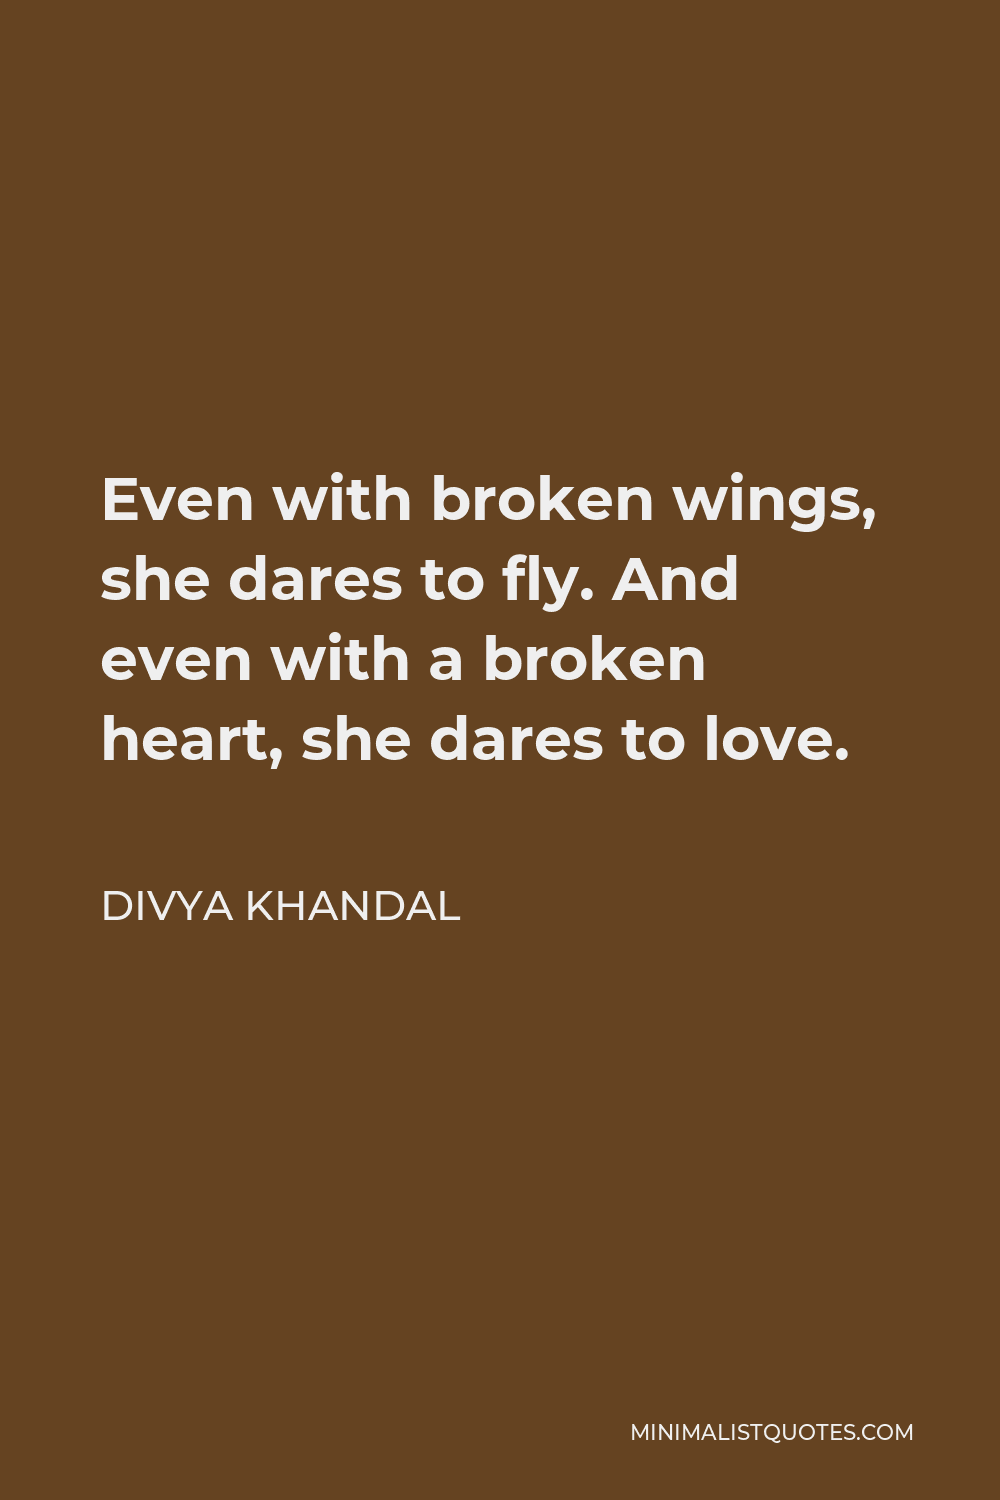 Divya khandal Quote - Even with broken wings, she dares to fly. And even with a broken heart, she dares to love.